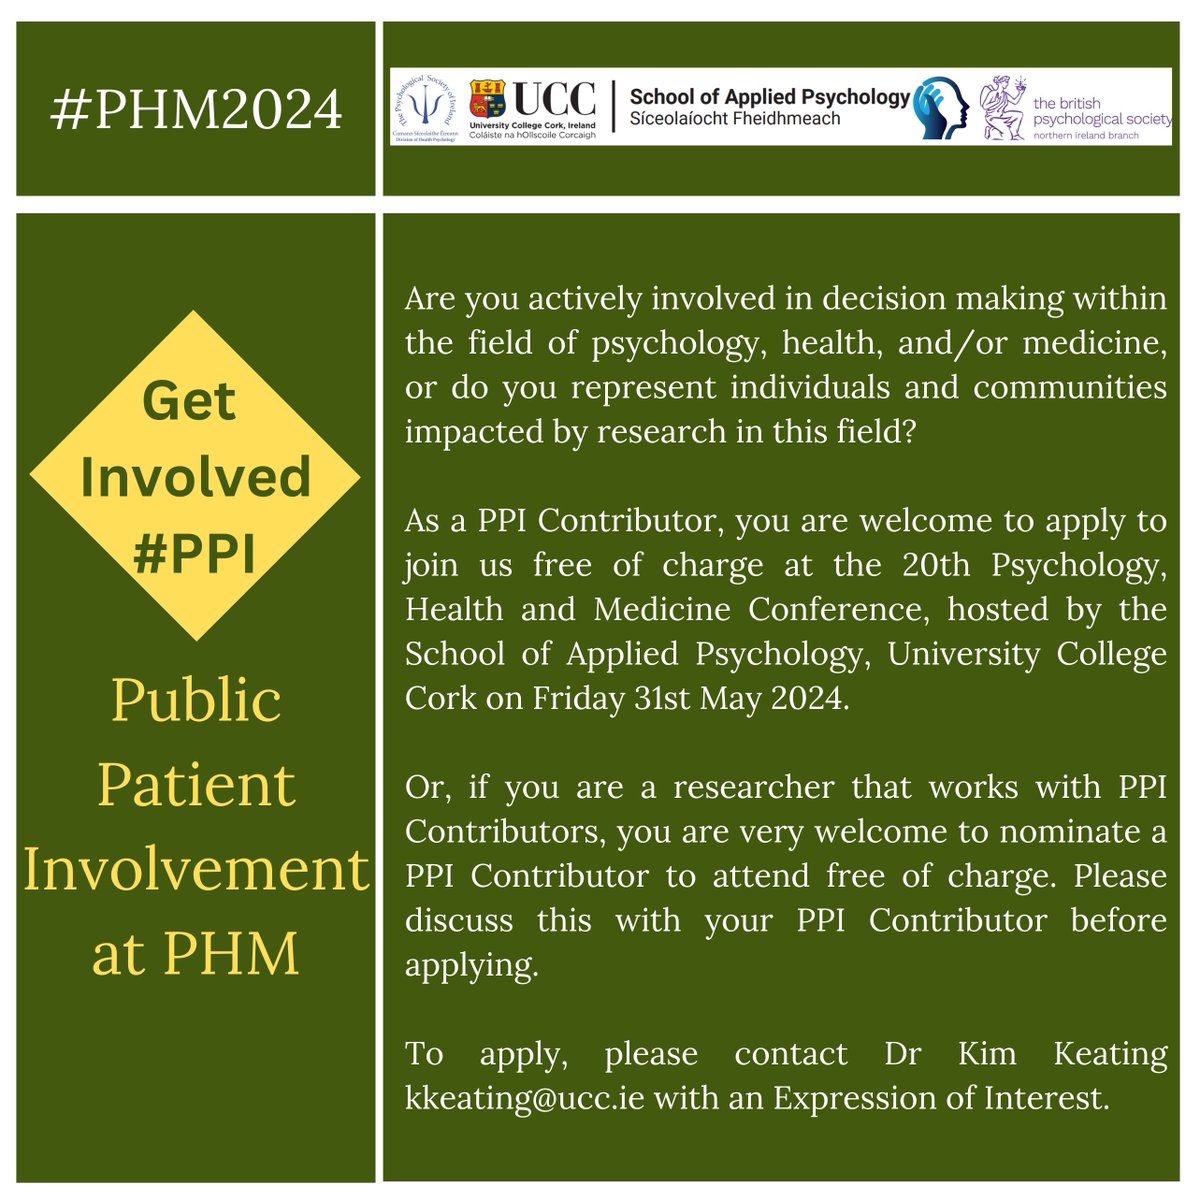 #PHM2024 Call for PPI Contributors! Join us at the 20th PHM conference, hosted by the School of Applied Psychology, UCC on Friday, May 31st, 2024, as a #PPI (Patient and Public Involvement) contributor. Find out more here ucc.ie/en/phm/patient…